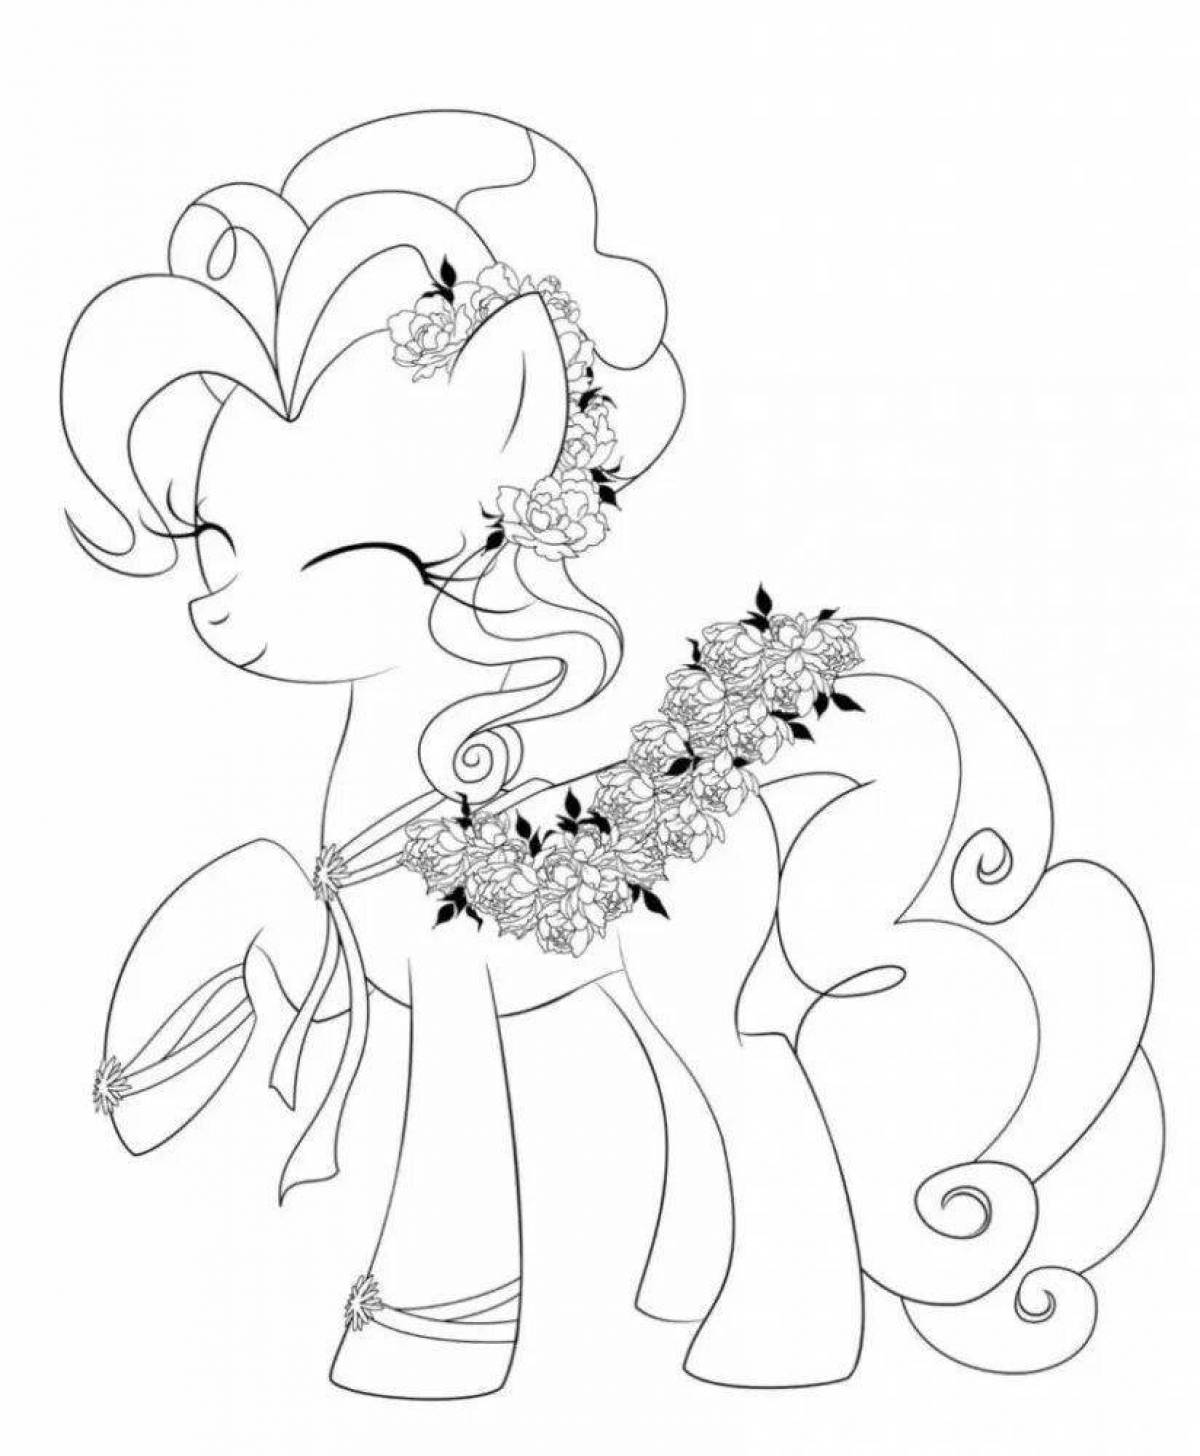 Fancy coloring of a pony in a dress